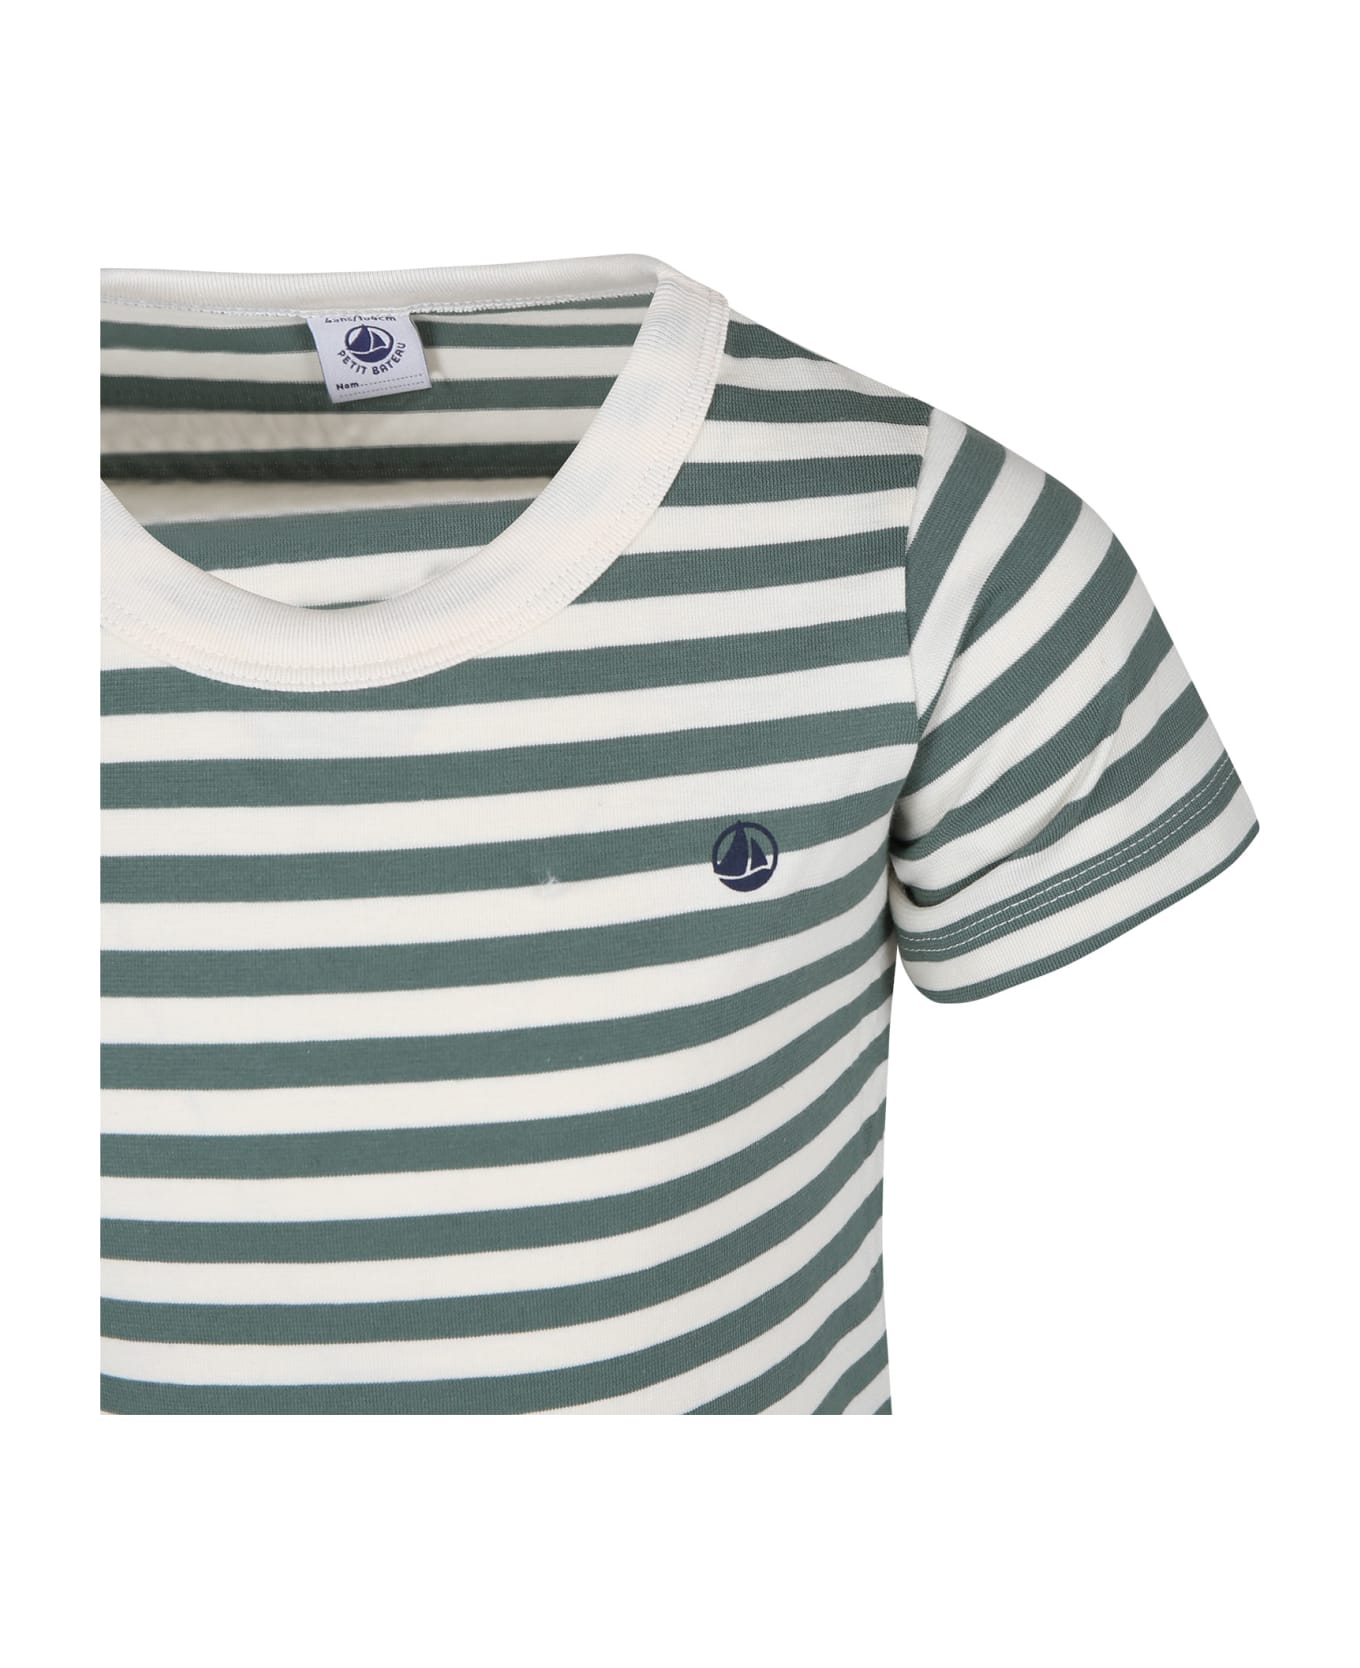 Petit Bateau Green T-shirt For Kids With Stripes - Green